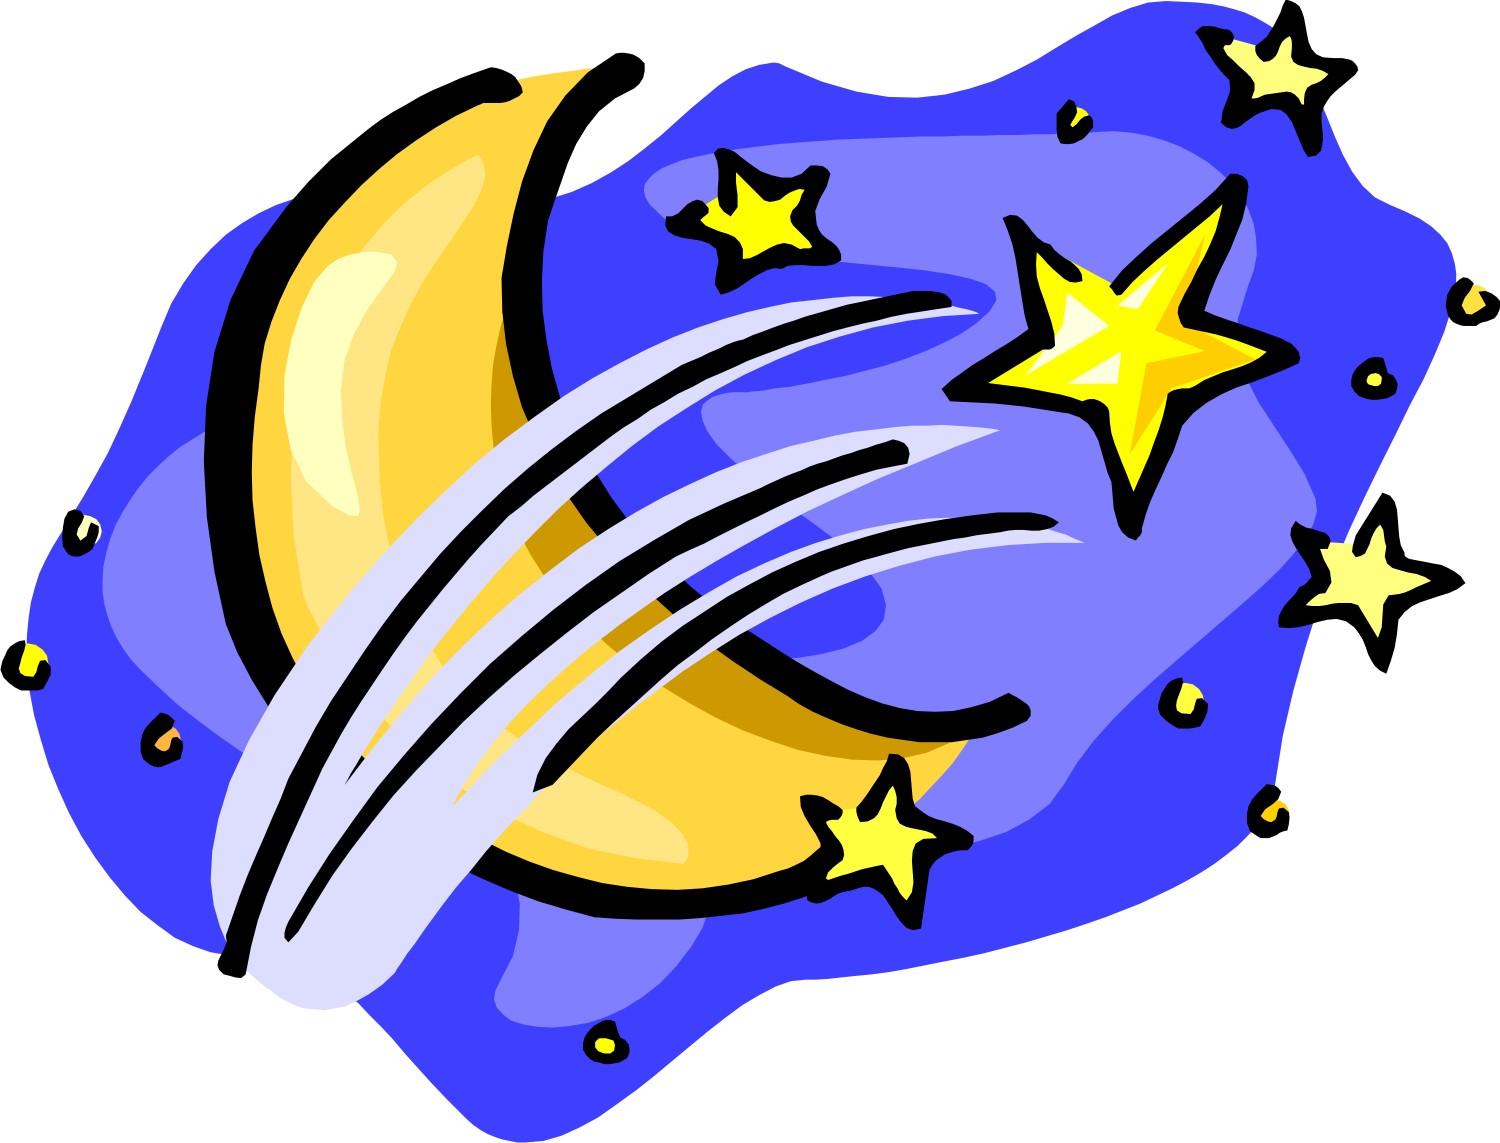 Black Stars And Moon Clipart 